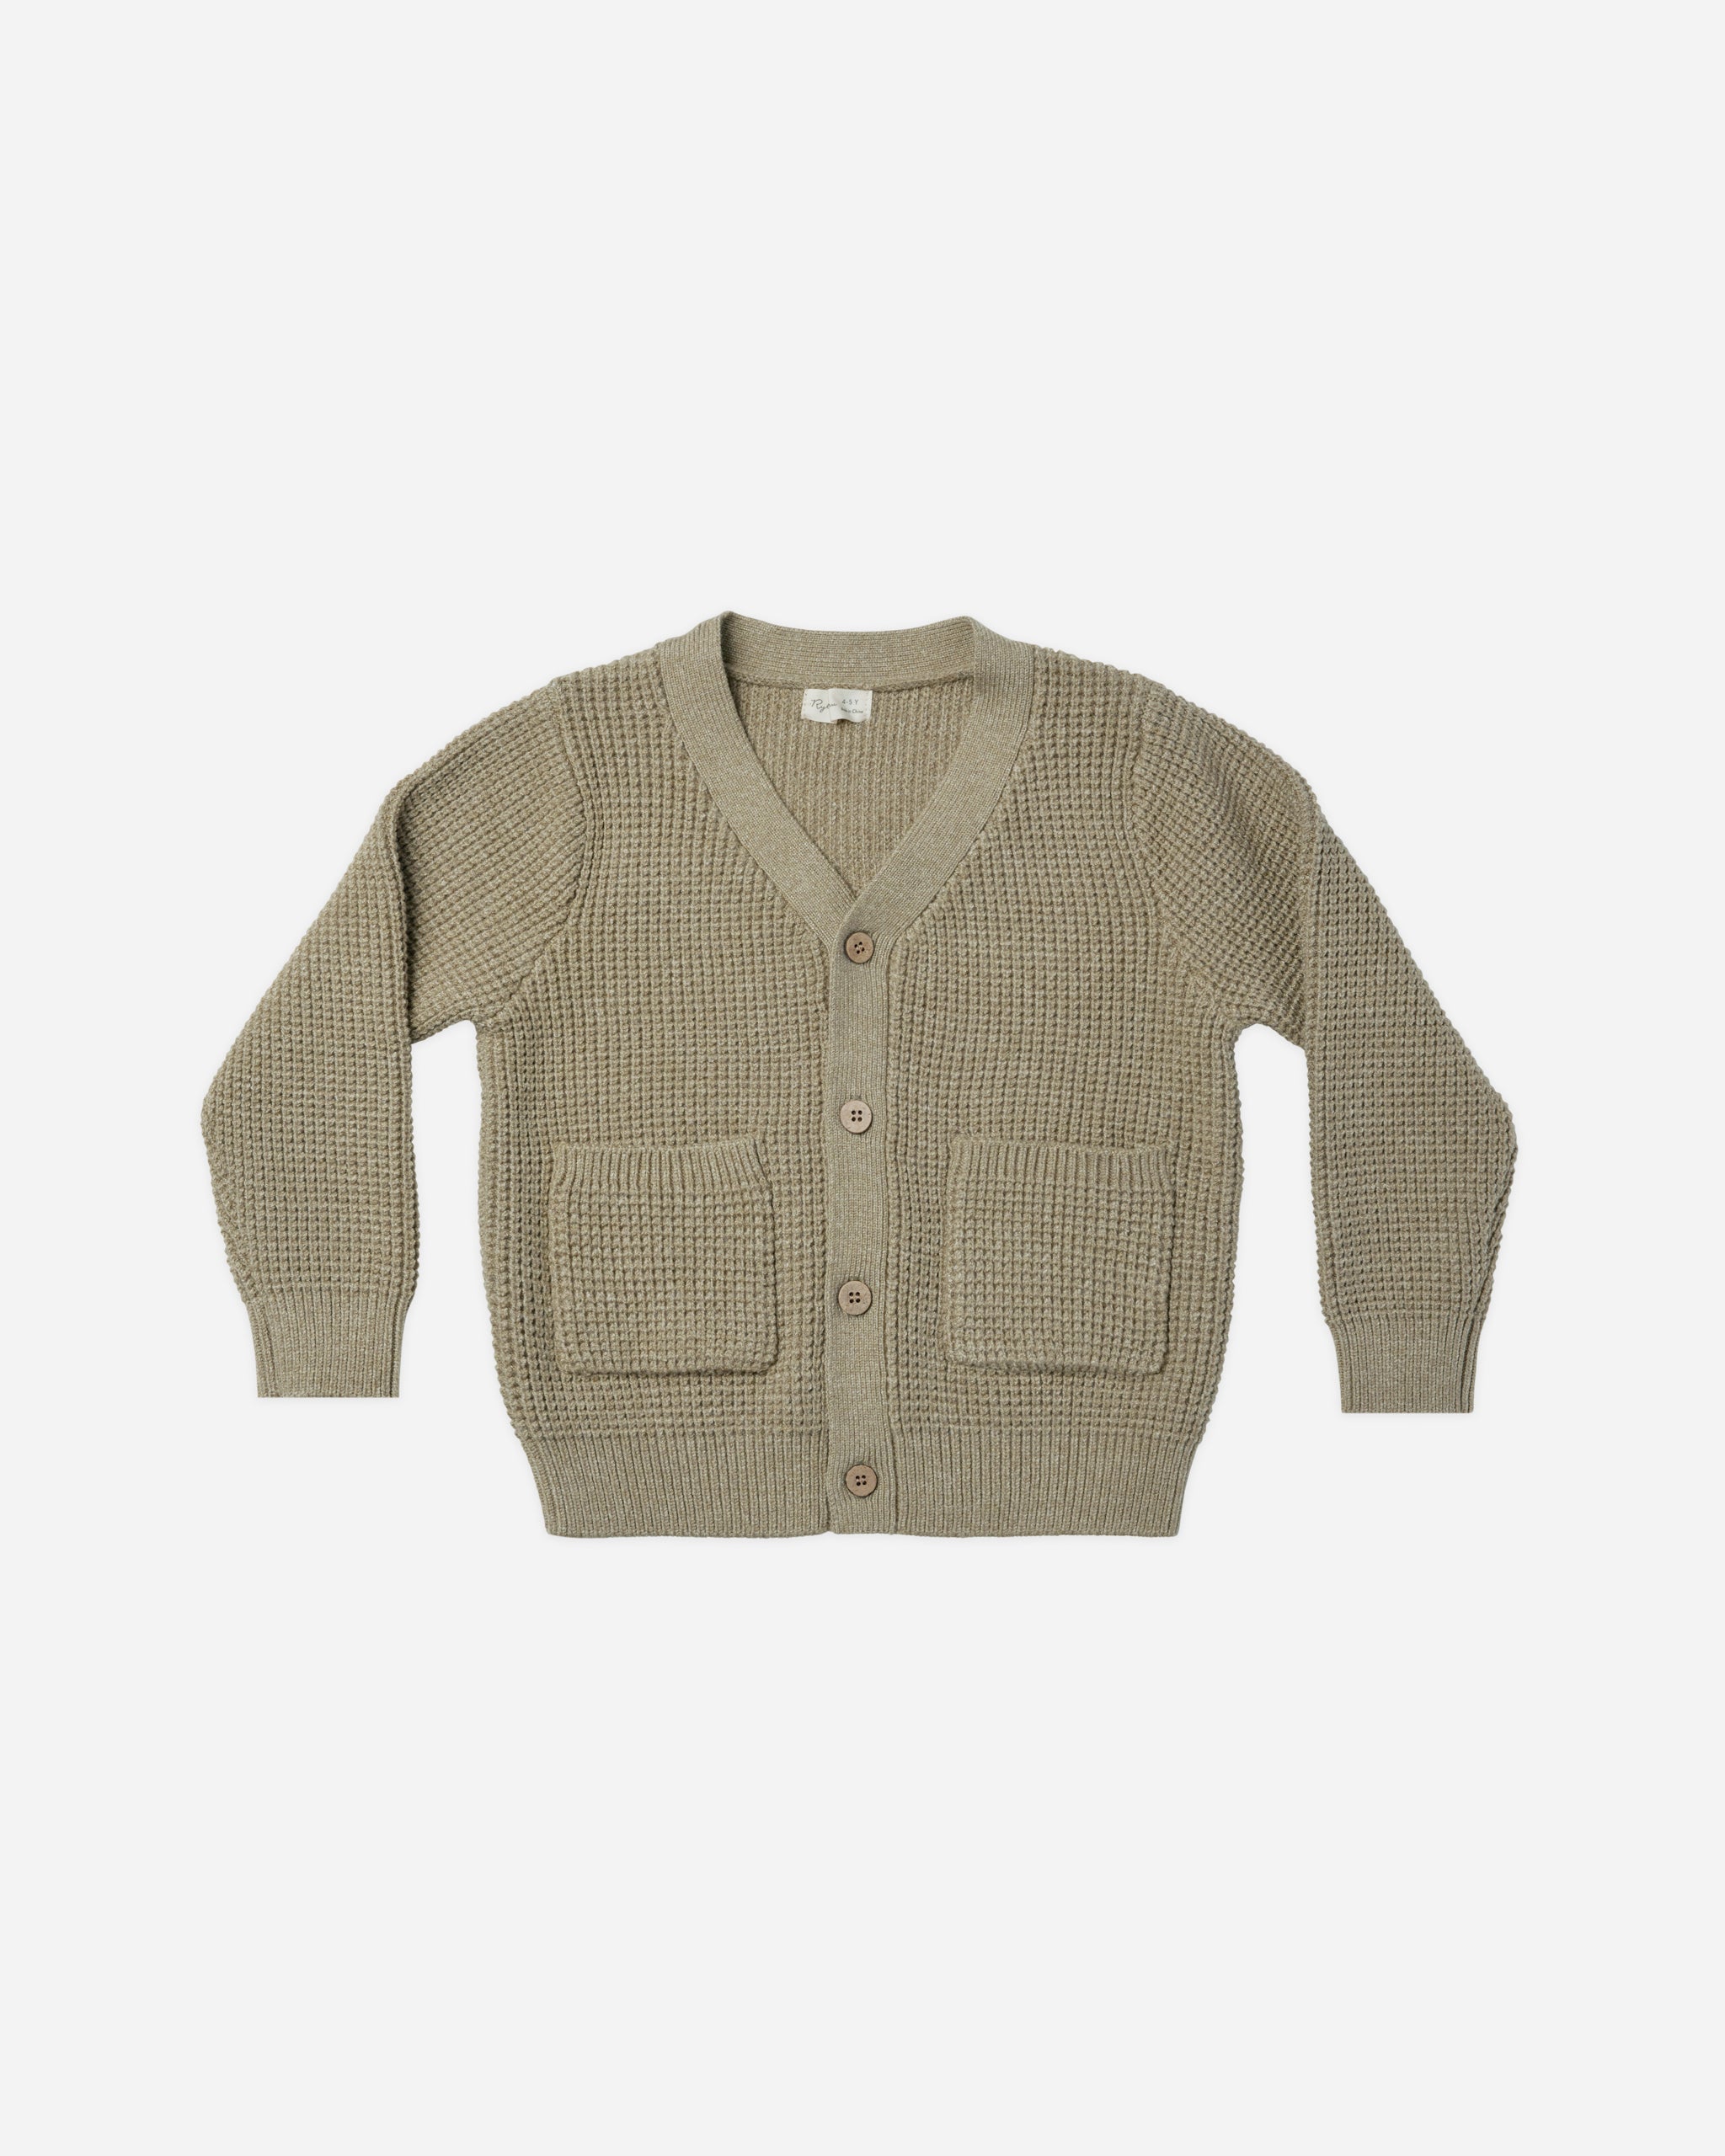 Boys Cardigan | Heathered Fern - Rylee + Cru | Kids Clothes | Trendy Baby Clothes | Modern Infant Outfits |